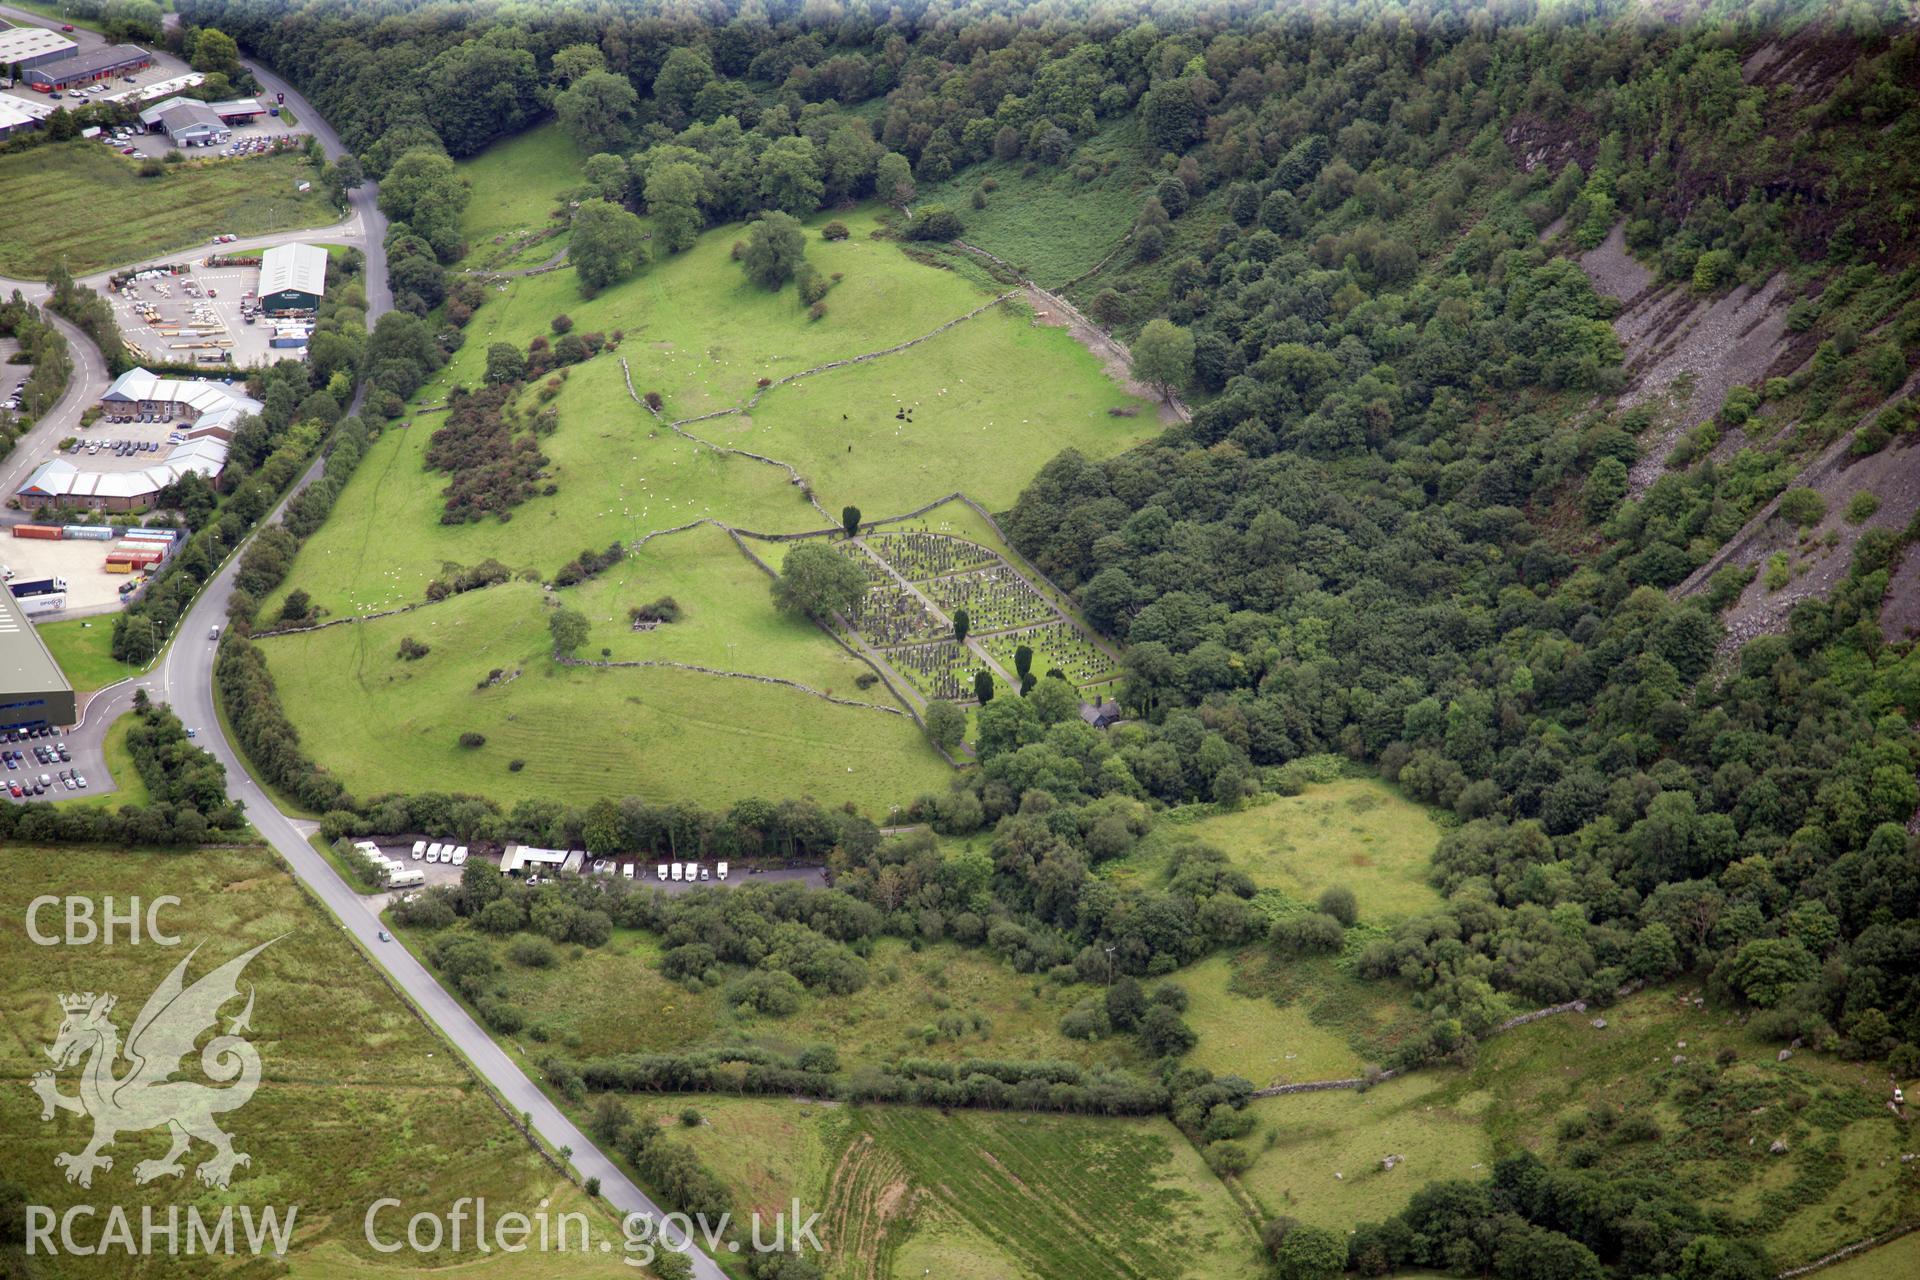 RCAHMW colour oblique photograph of Mortuary Chapels and Cemetery, Porthmadog. Taken by Toby Driver on 17/08/2011.